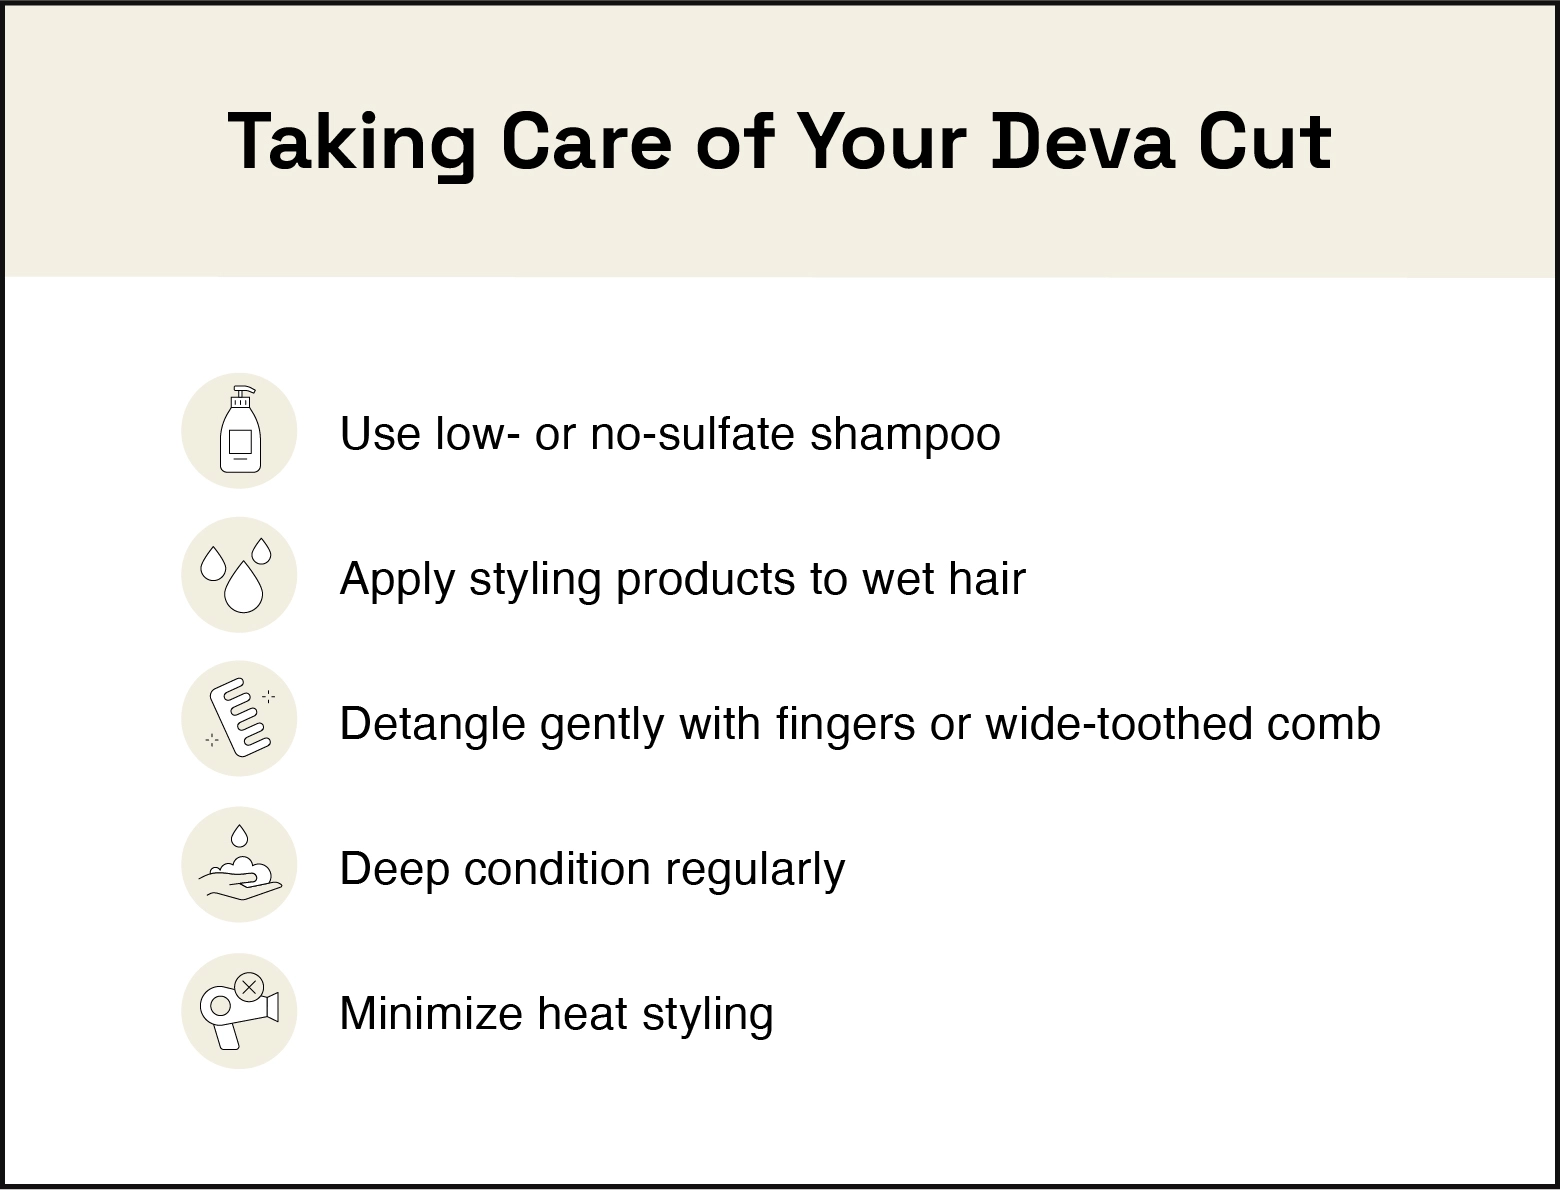 Image shows care tips for maintaining a Deva cut.